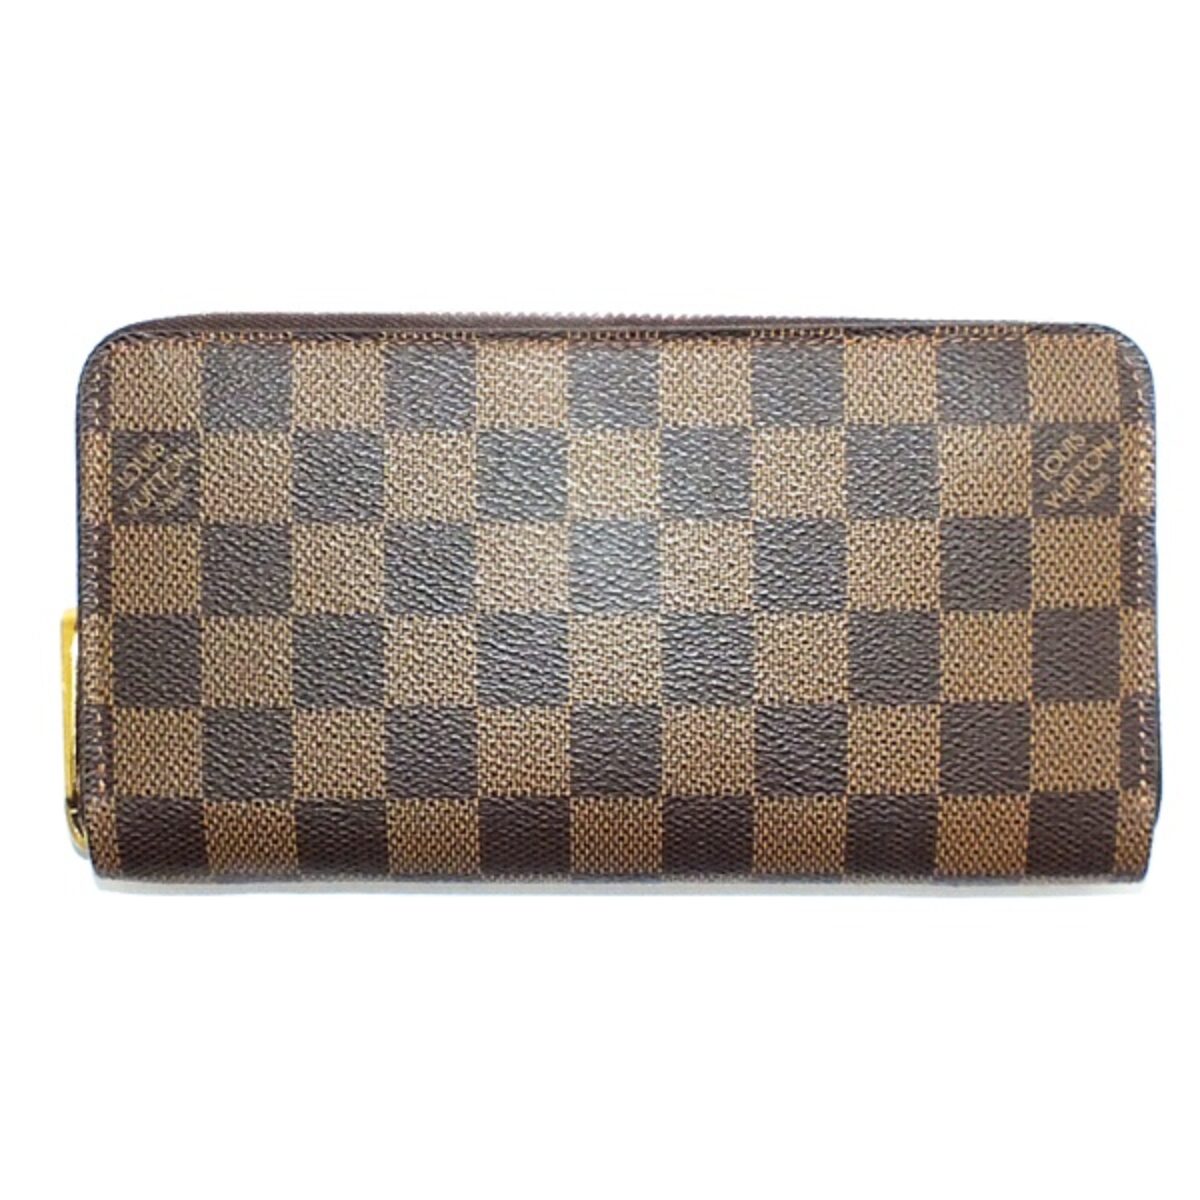 LOUIS VUITTON ルイヴィトン N60015 旧型 ジッピーウォレット ダミエ